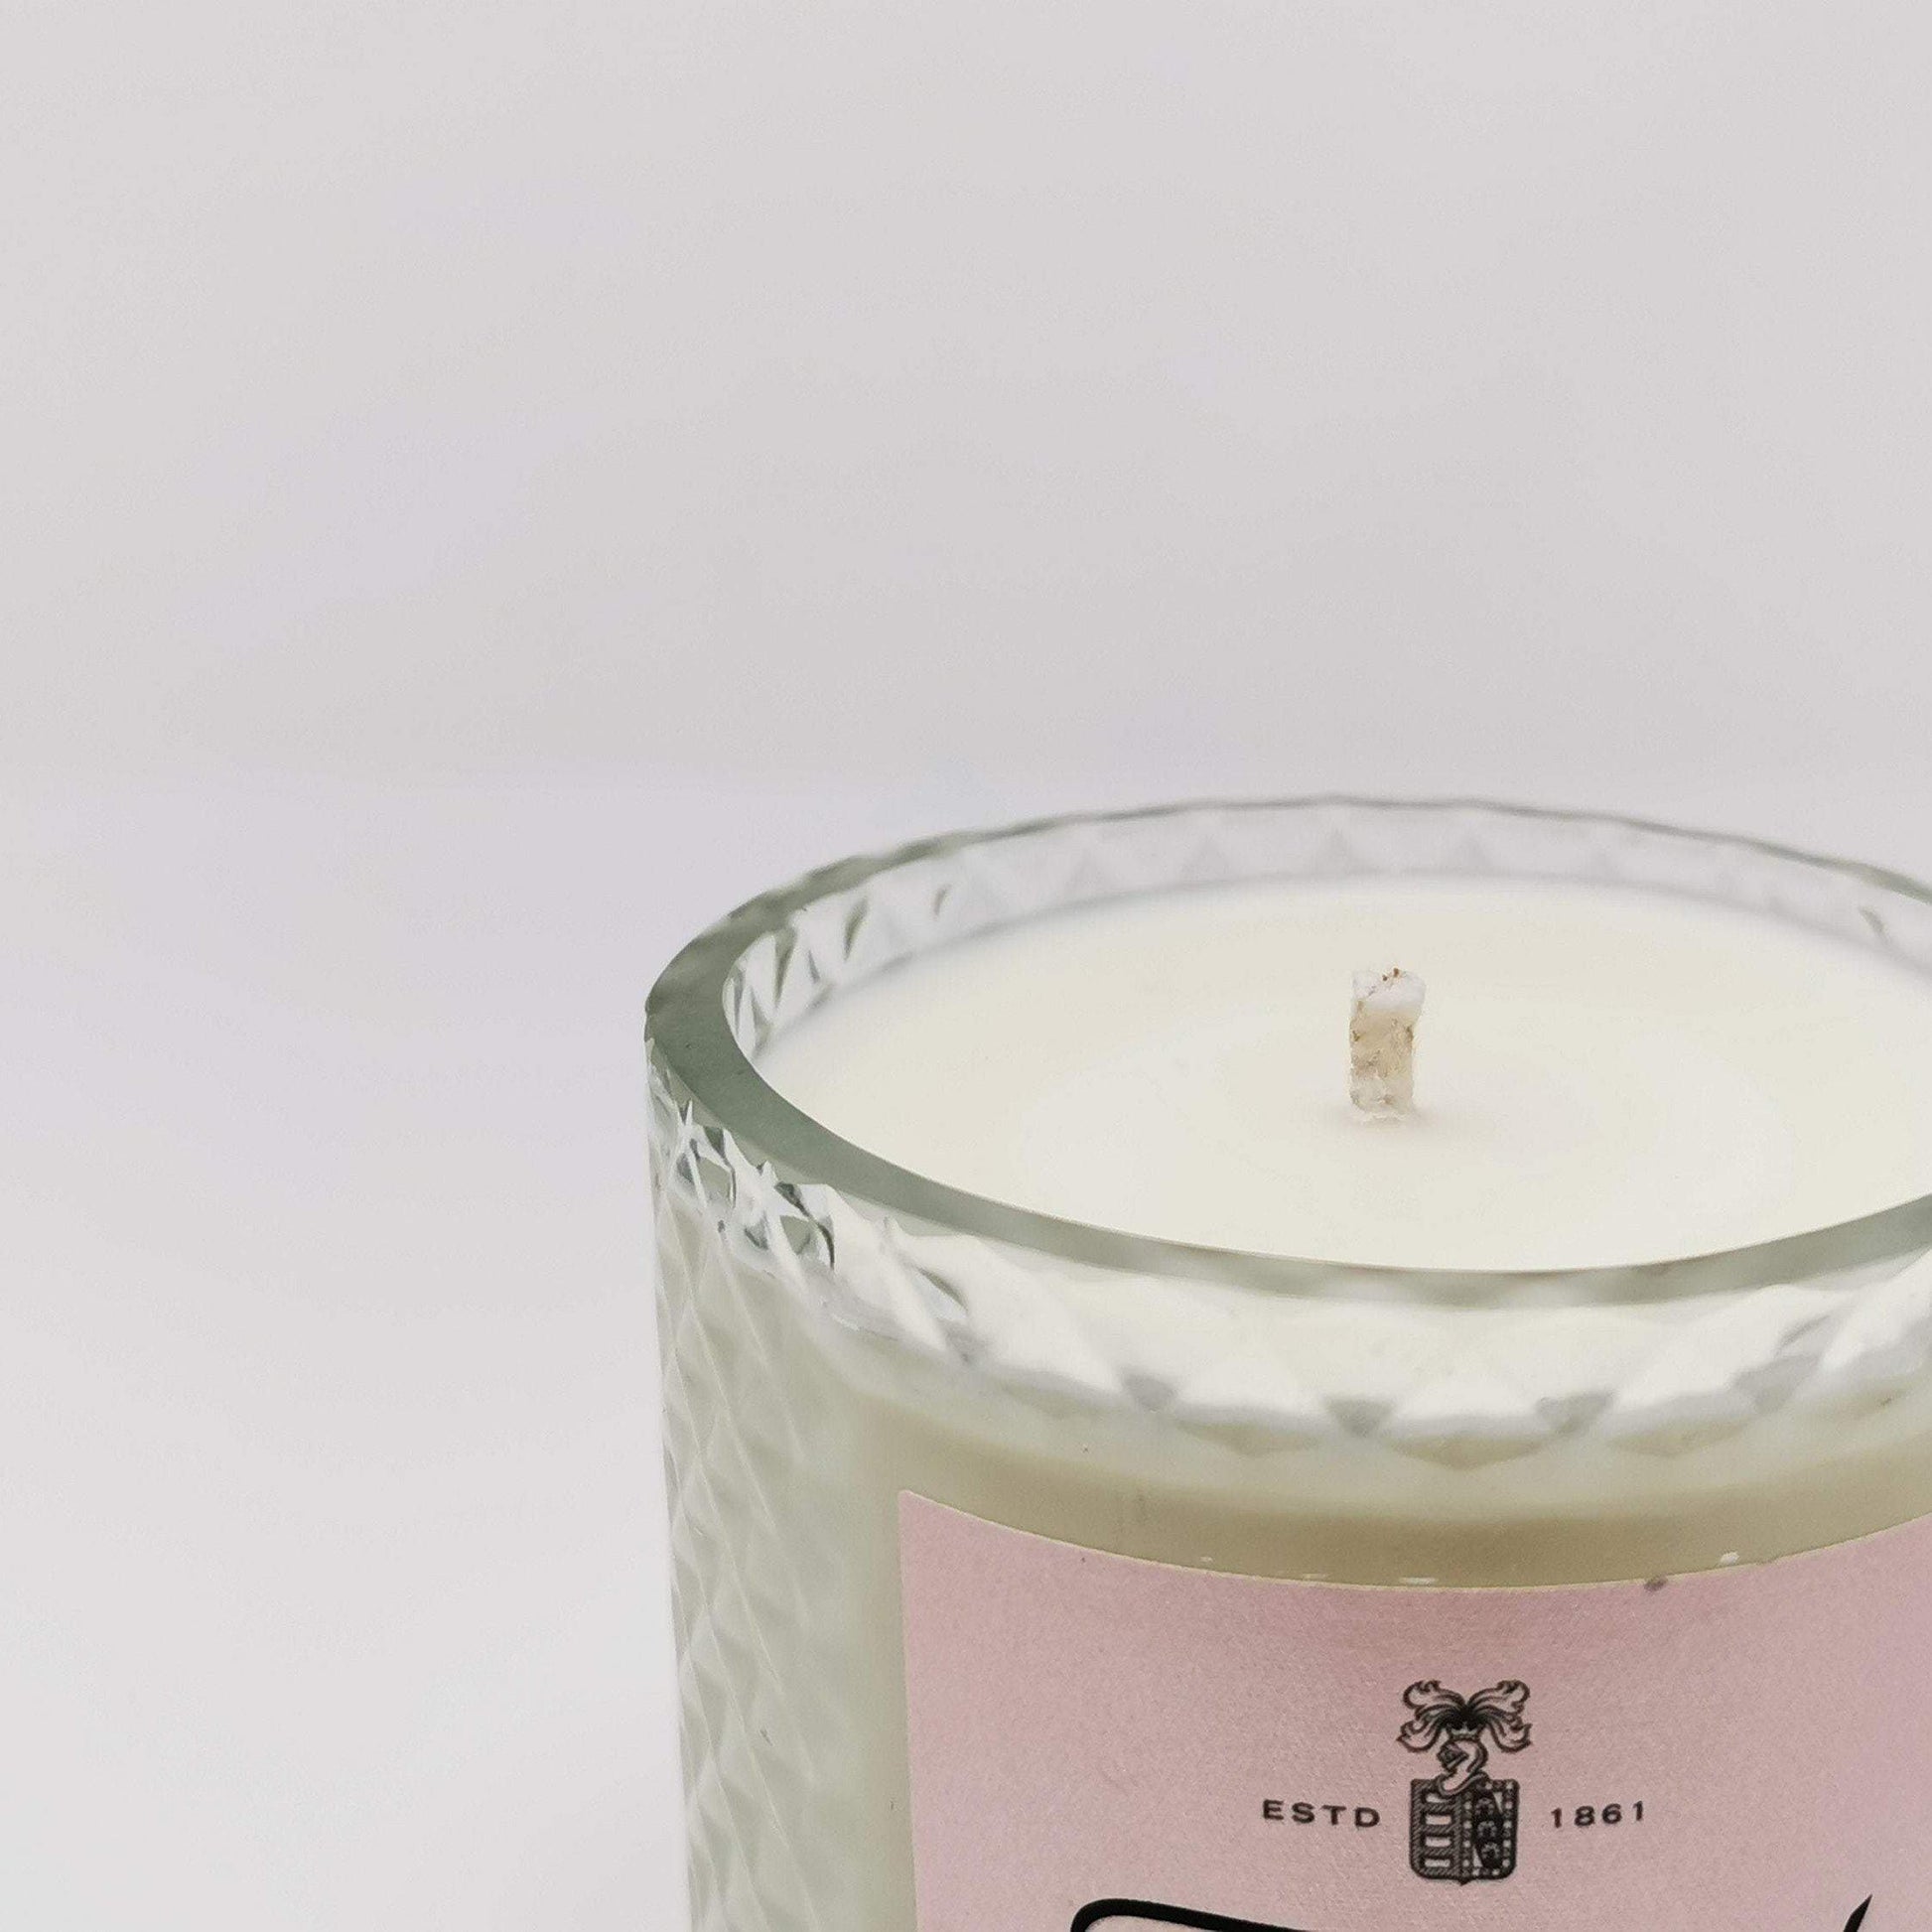 Freixenet Rose Prosecco Bottle Candle Wine & Prosecco Bottle Candles Adhock Homeware